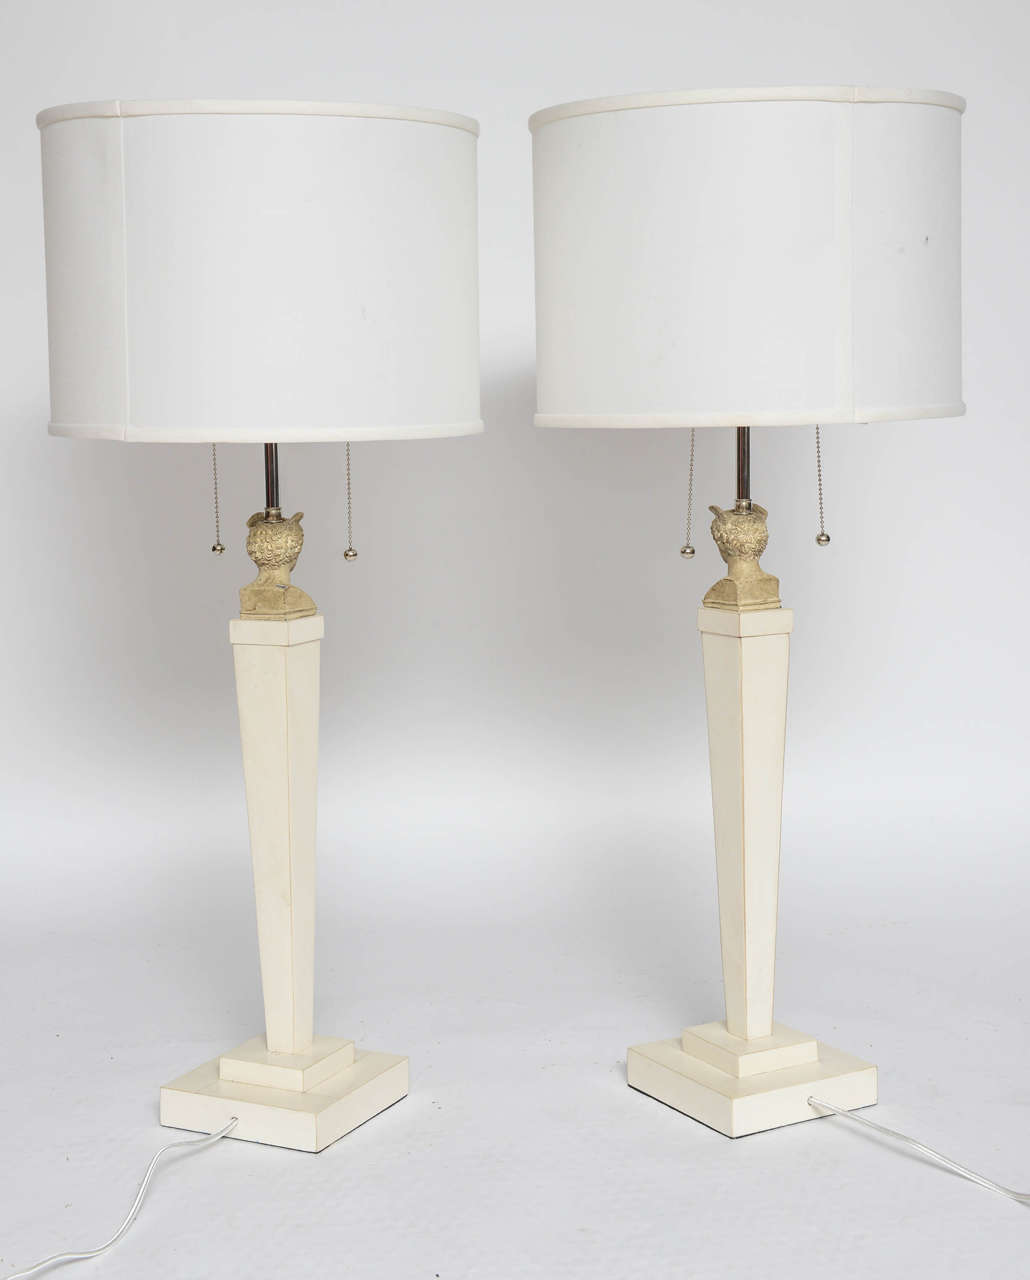 Vintage Italian Neoclassic Style Parchment Column Table Lamps, Pair For Sale 1